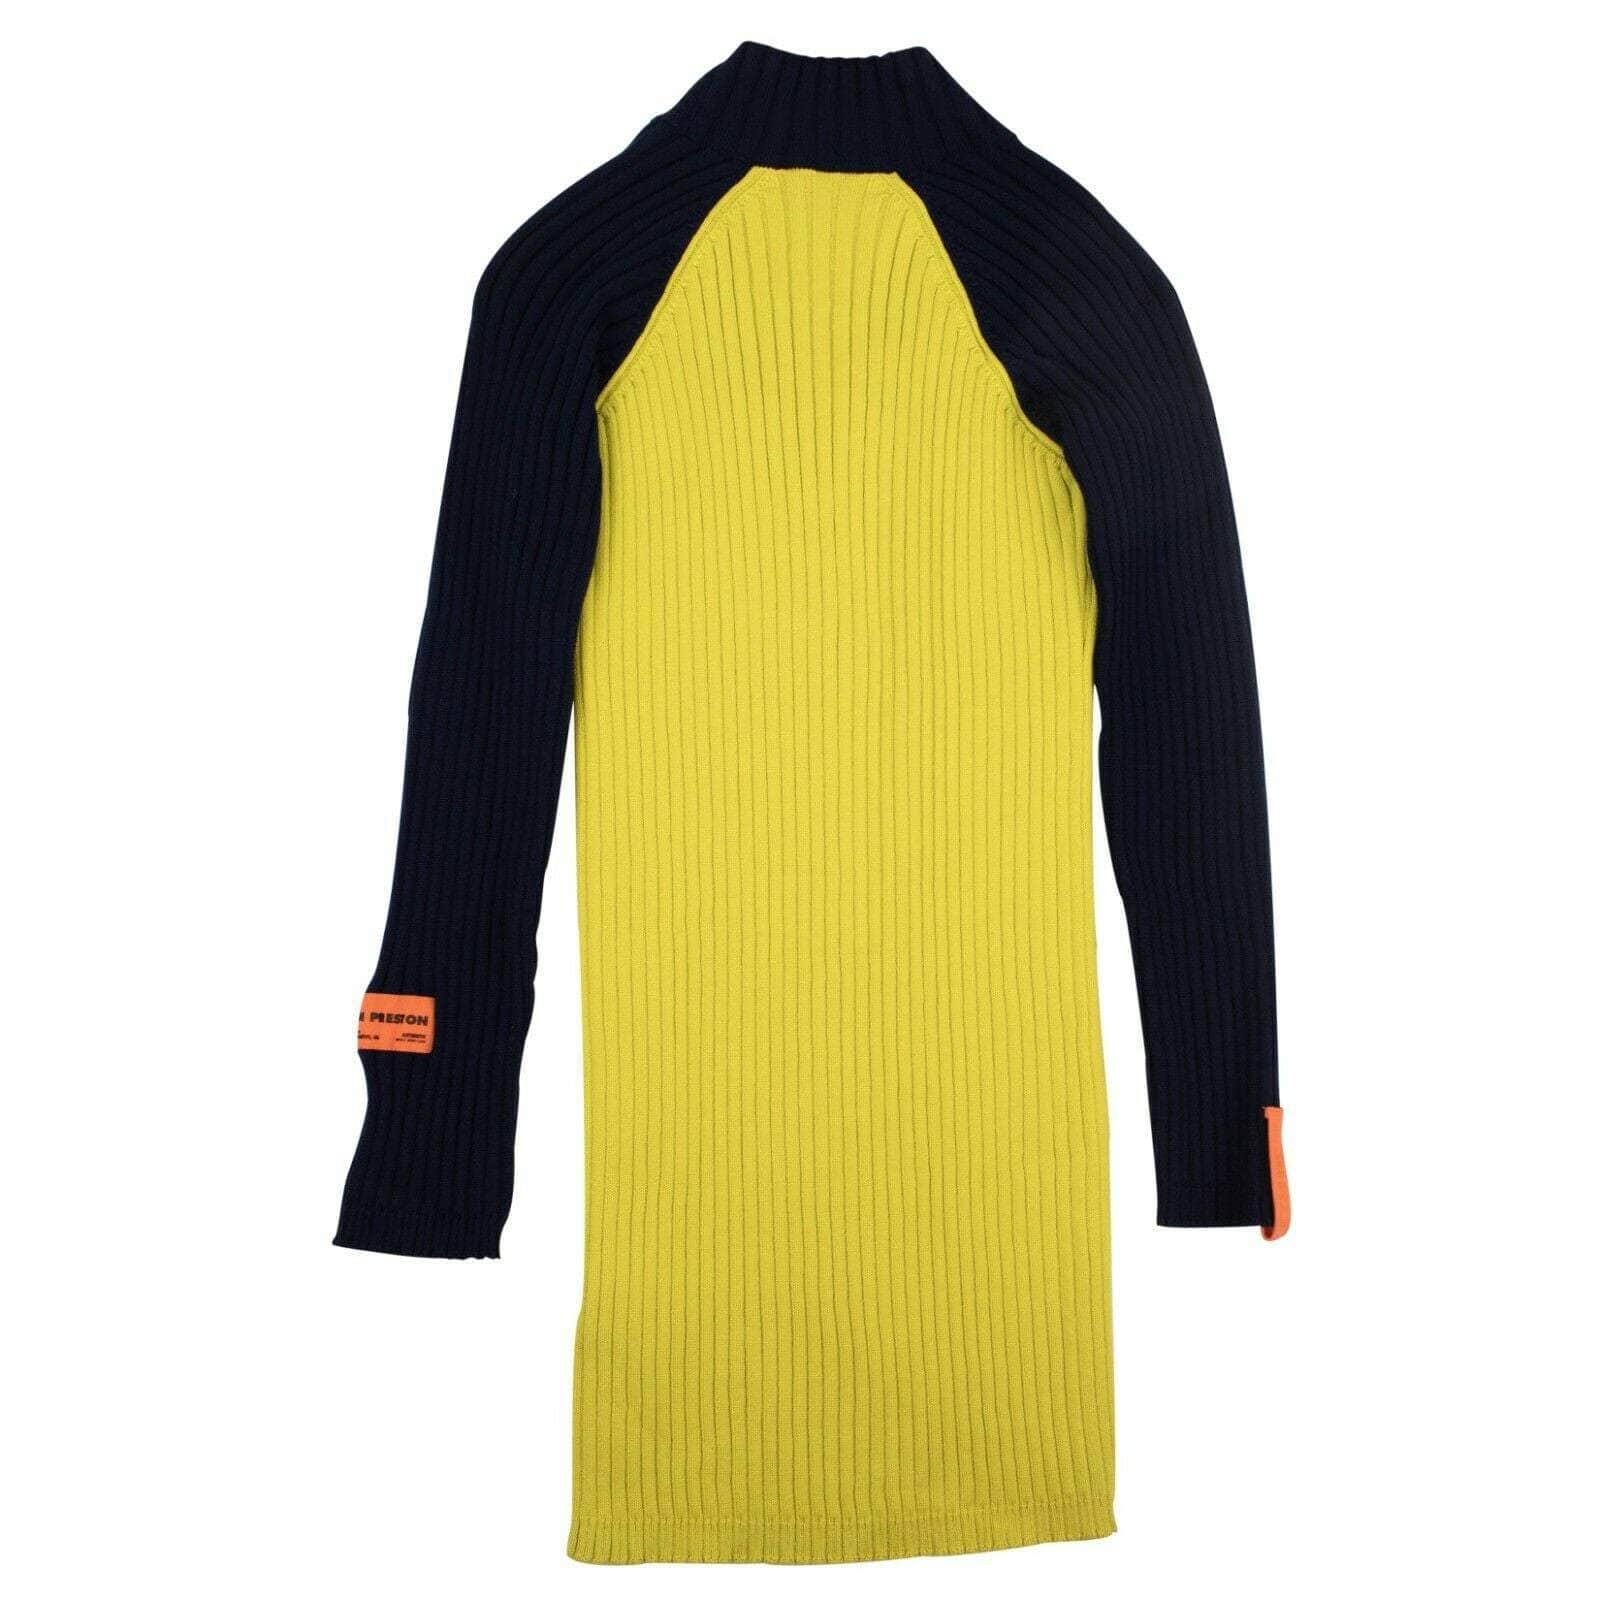 Heron Preston 250-500, chicmi, couponcollection, do-not-use-womens-dresses, dress, gender-womens, heron-preston, main-clothing, size-s, womens-dresses S Navy And Yellow Ribbed Knit Dress 82NGG-HP-1235/S 82NGG-HP-1235/S